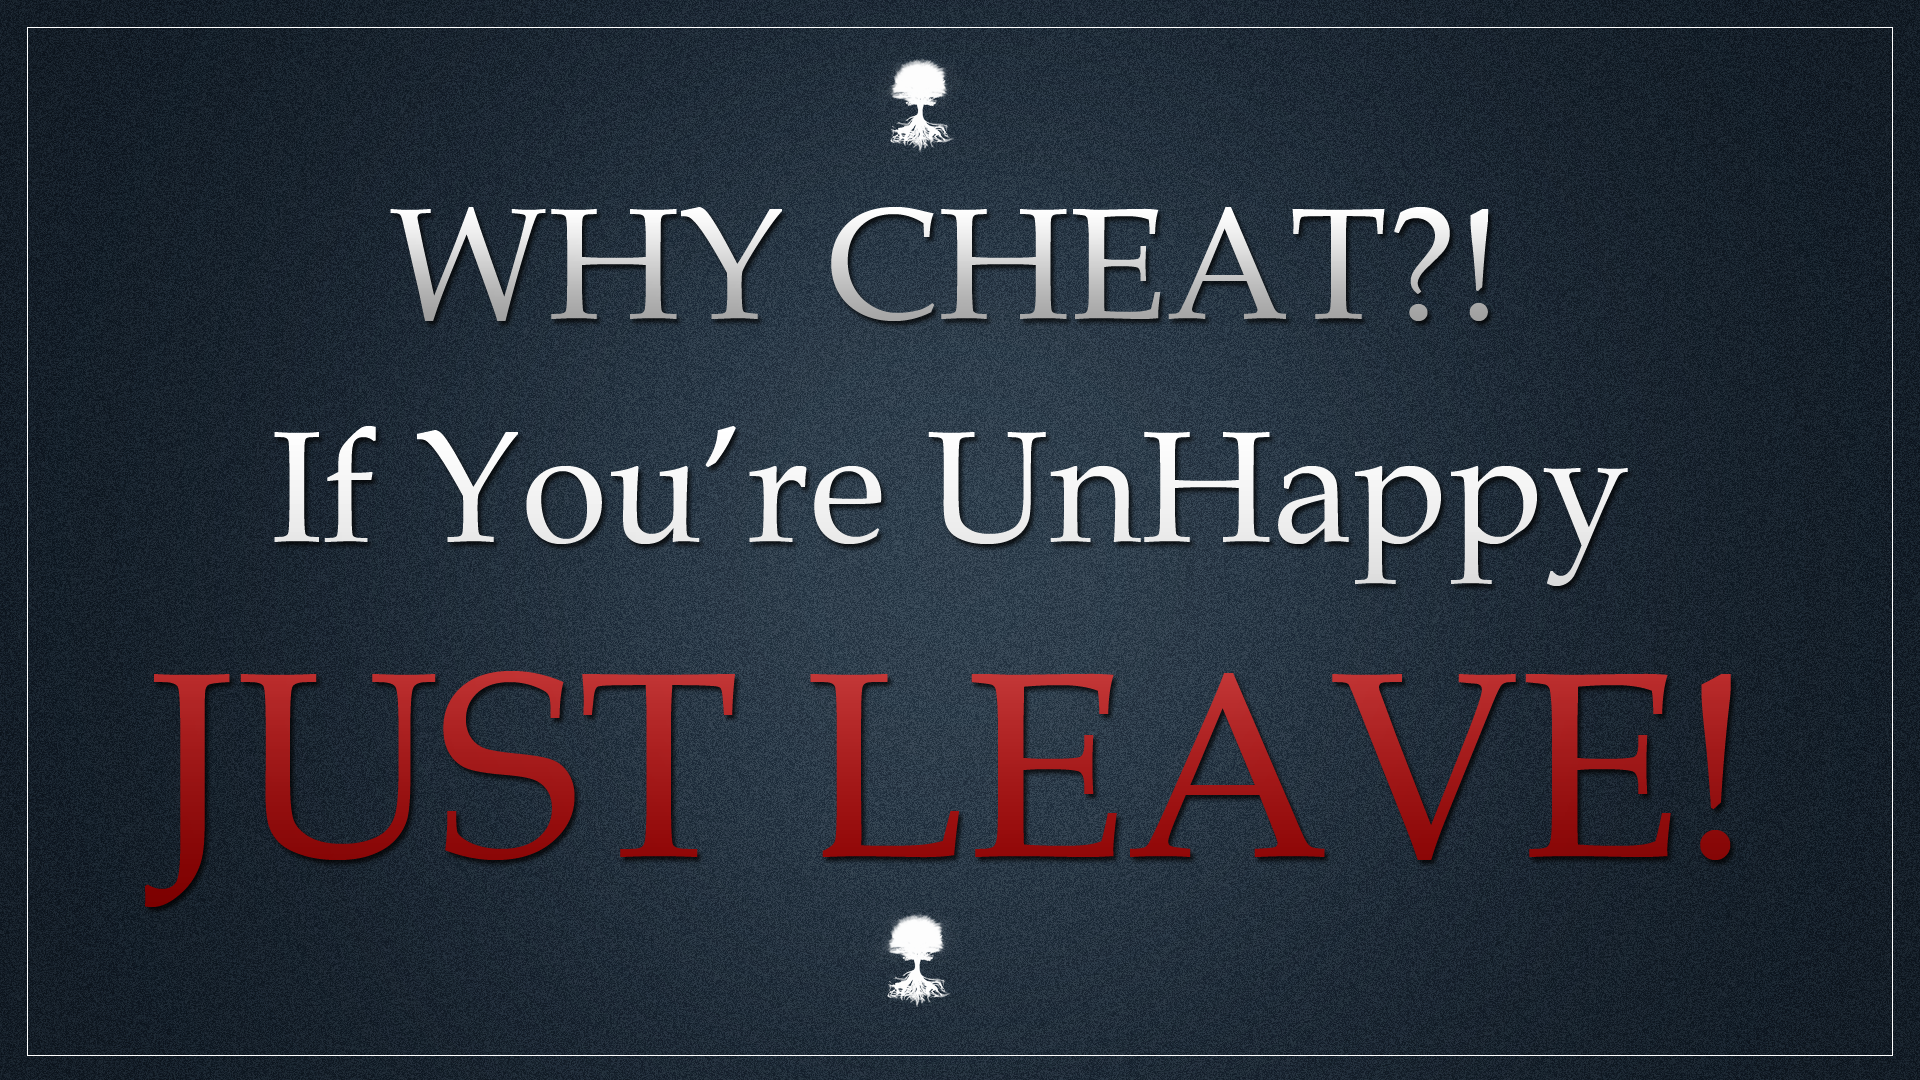 cheating-why-cheat-just-leave-meme-theblackmedia-2016.